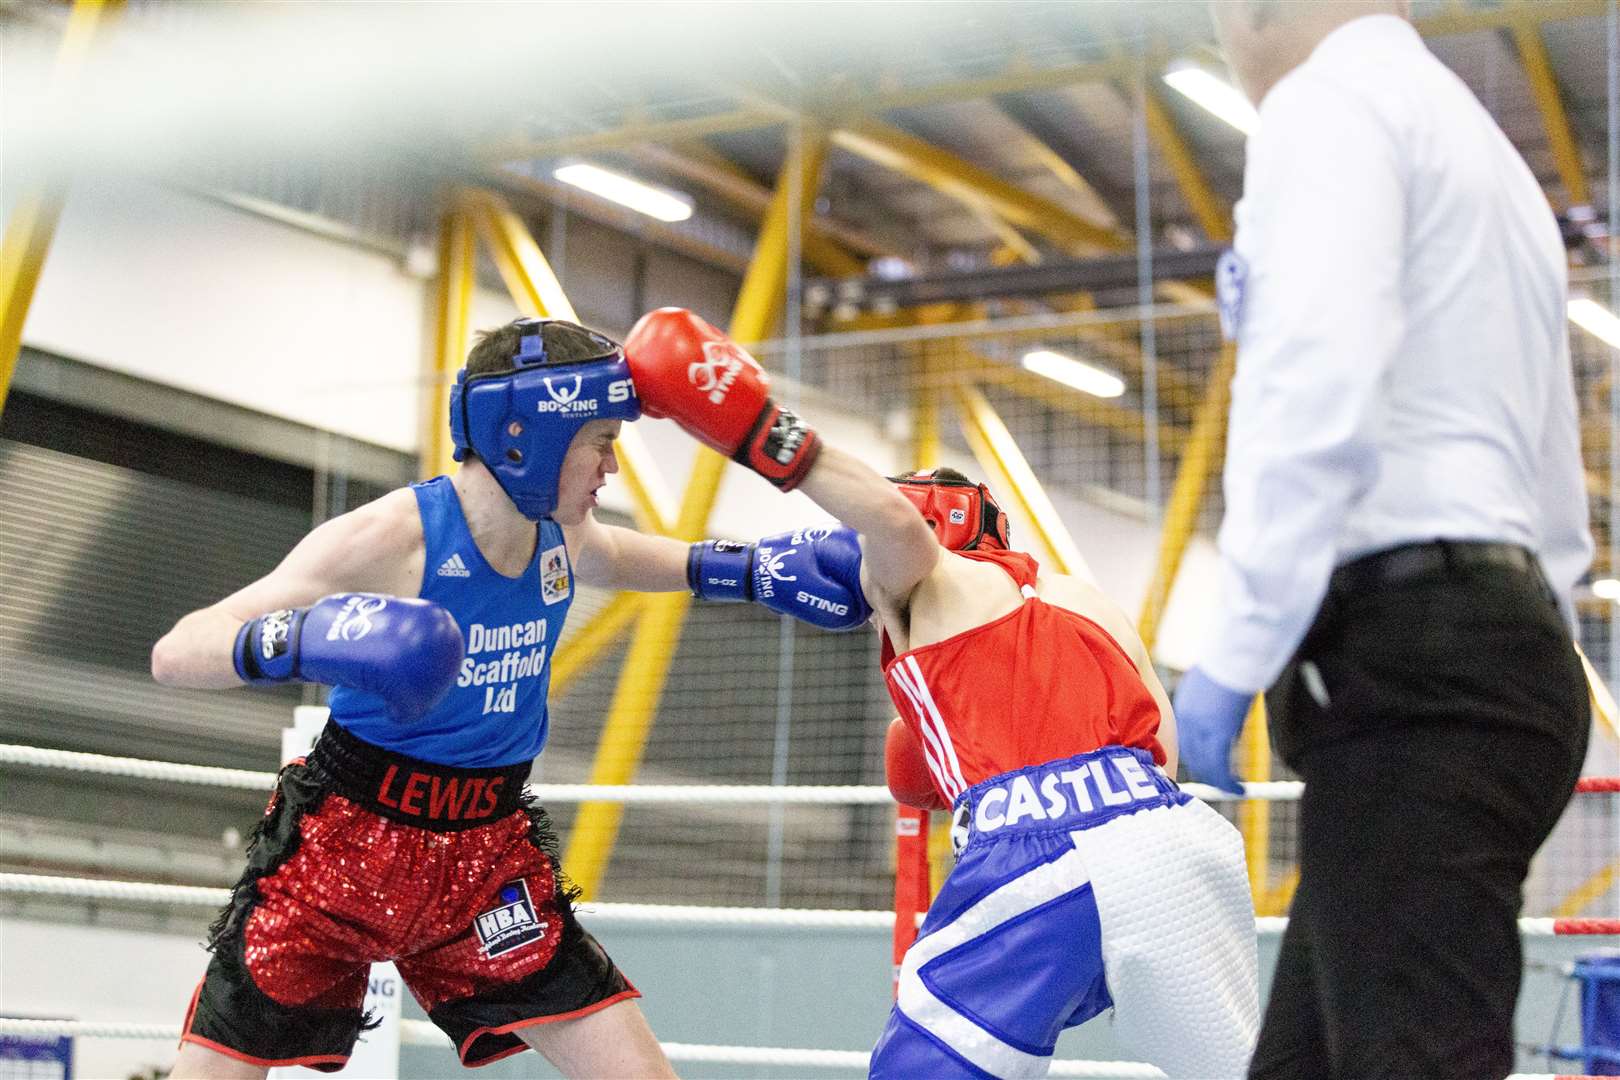 Lewis Urquhart in action against Granite City's Dean Castle on his way to winning the Scottish Intermediate Title in 2019.